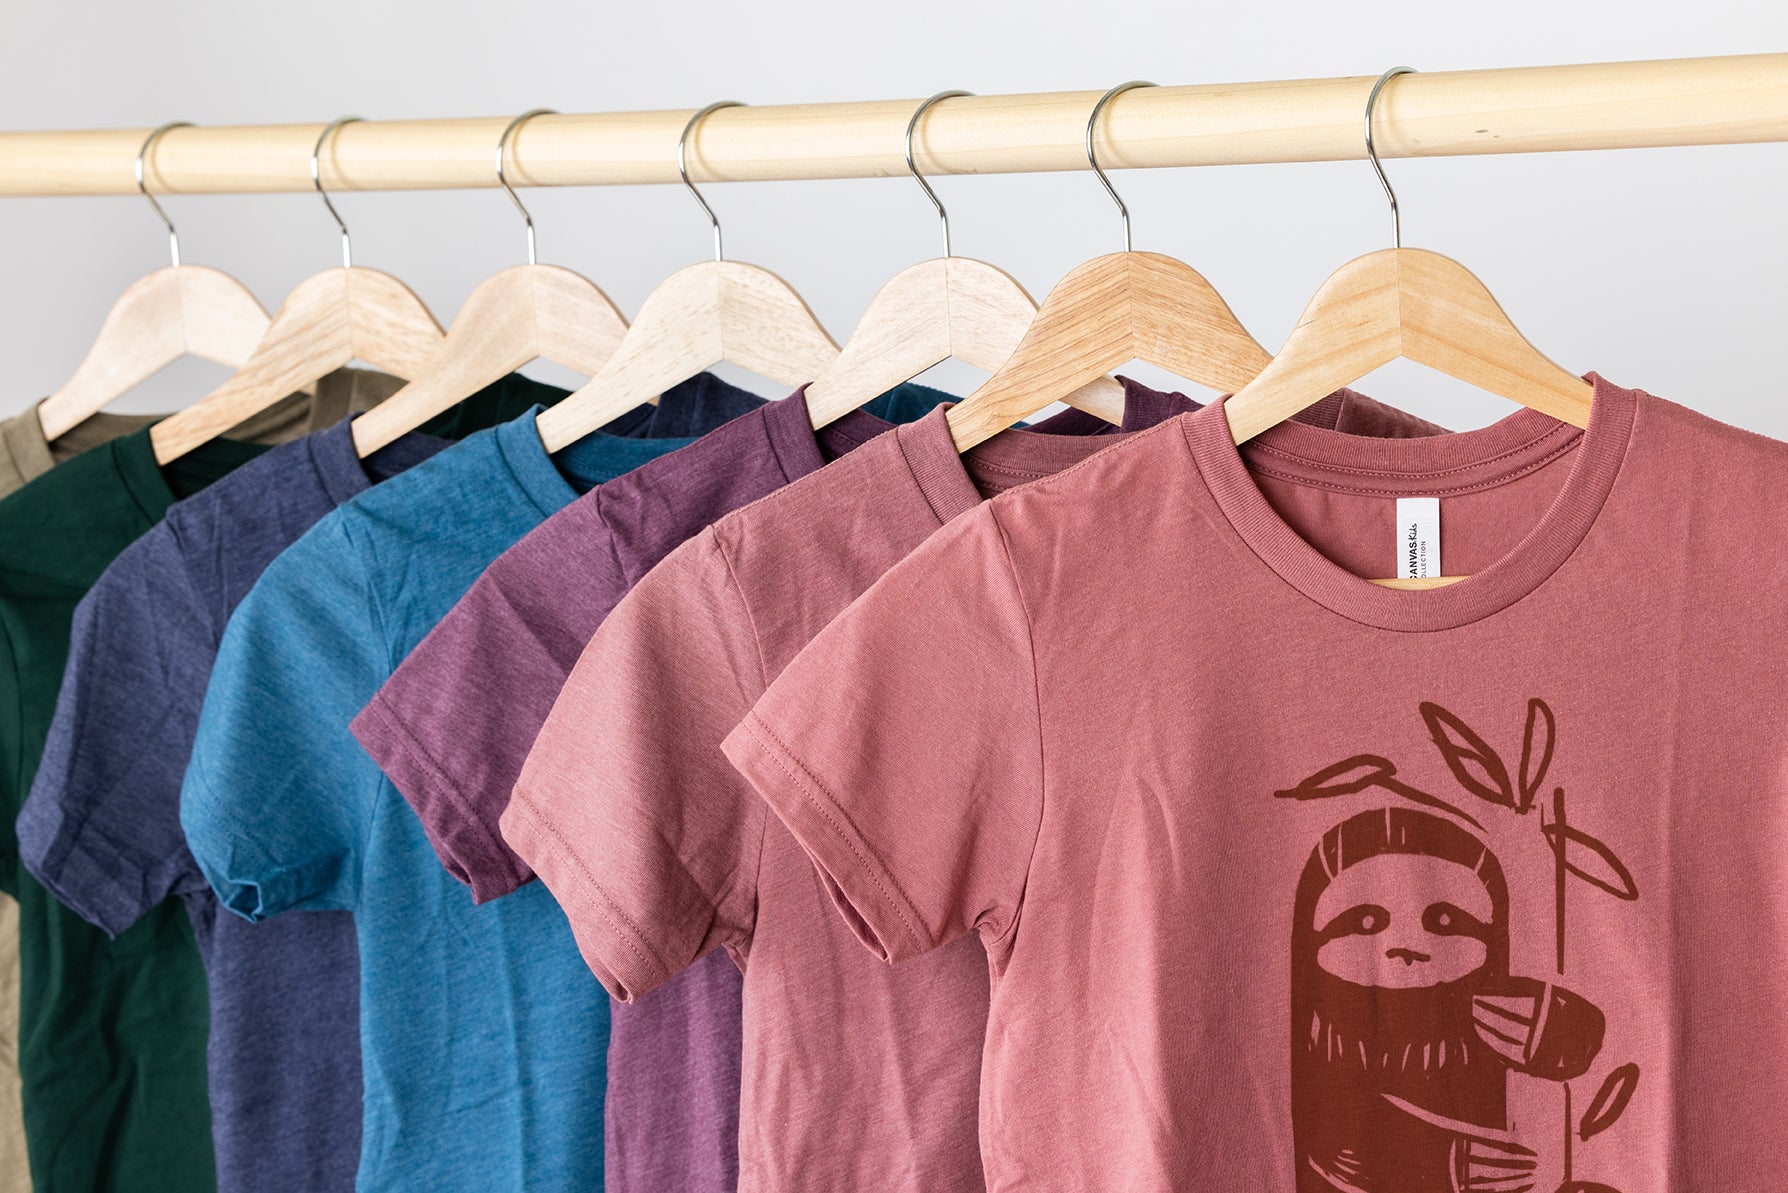 Children's holiday and seasonal t-shirt subscription including sloth graphic..